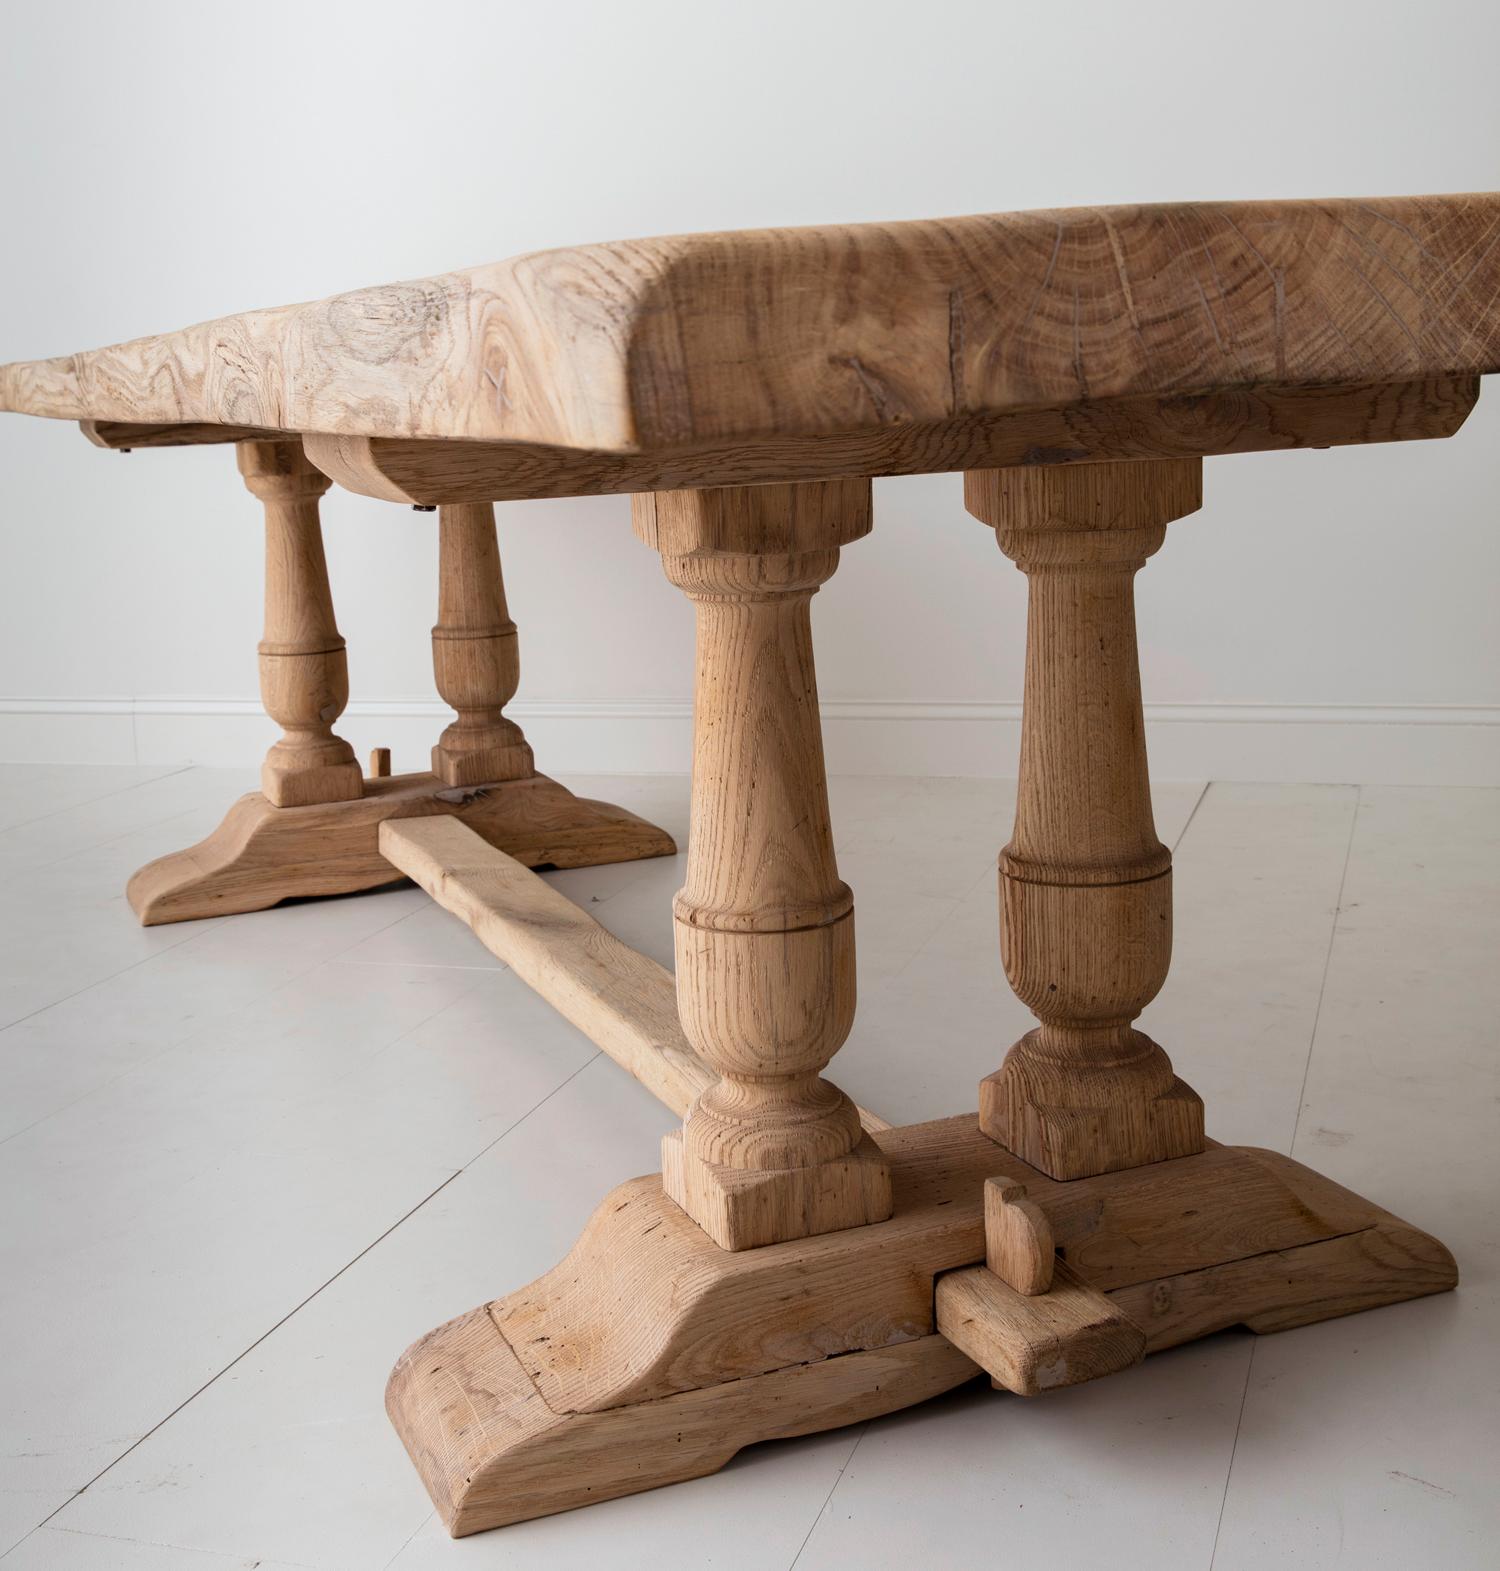 French Provincial 19th Century French Large Bleached Oak Provençal Style Trestle Table